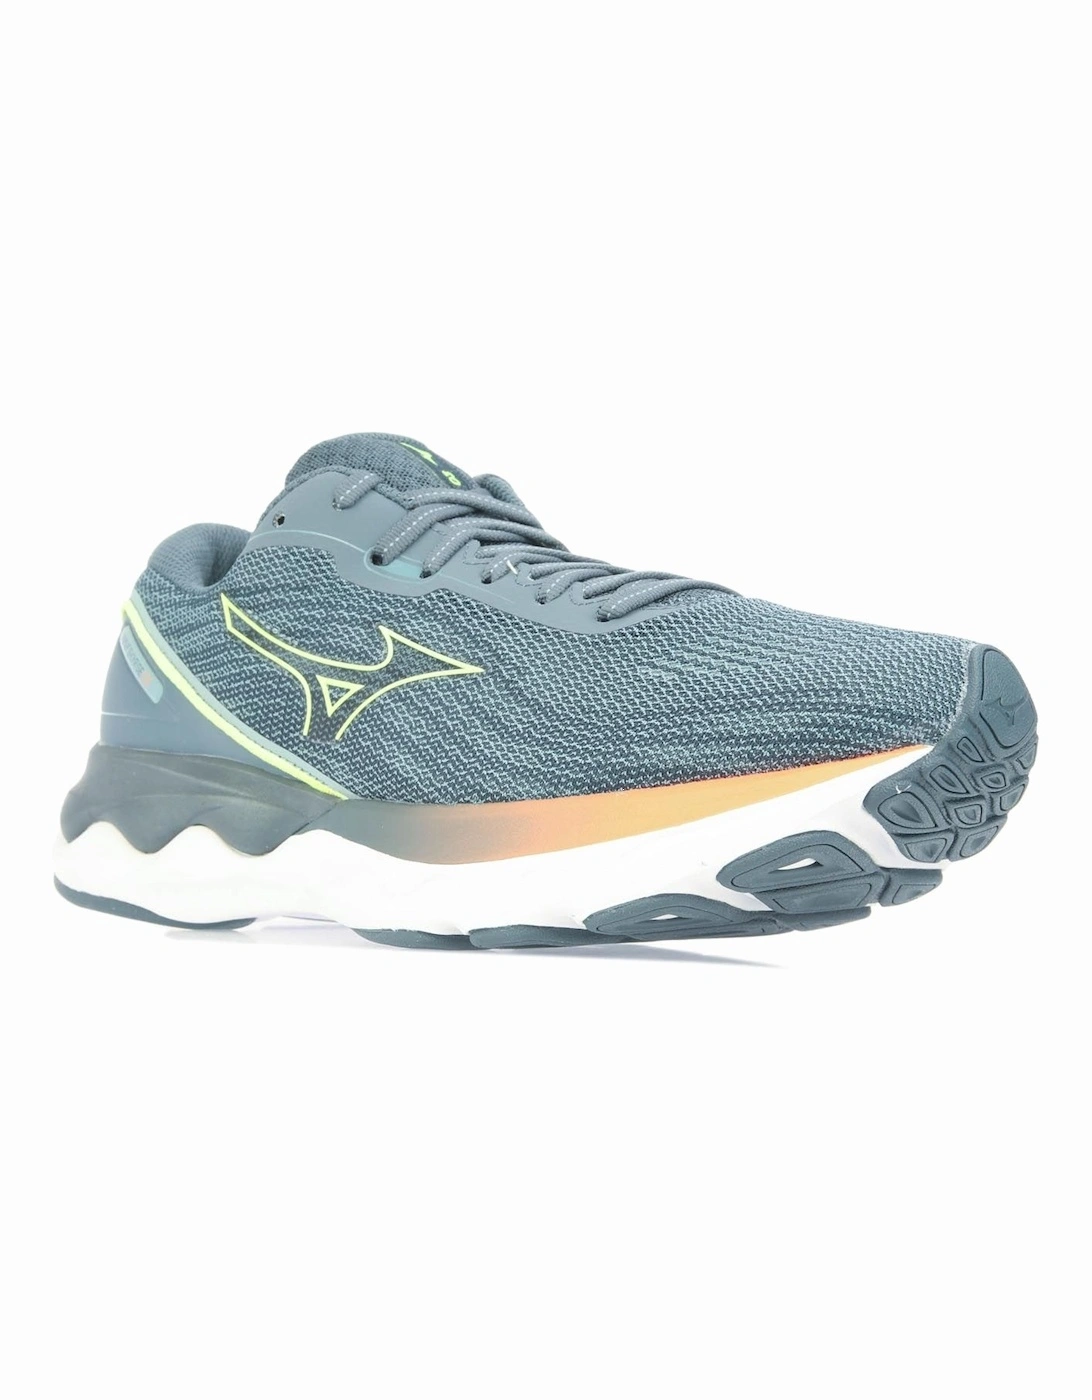 Mens Wave Skyrise Running Shoes